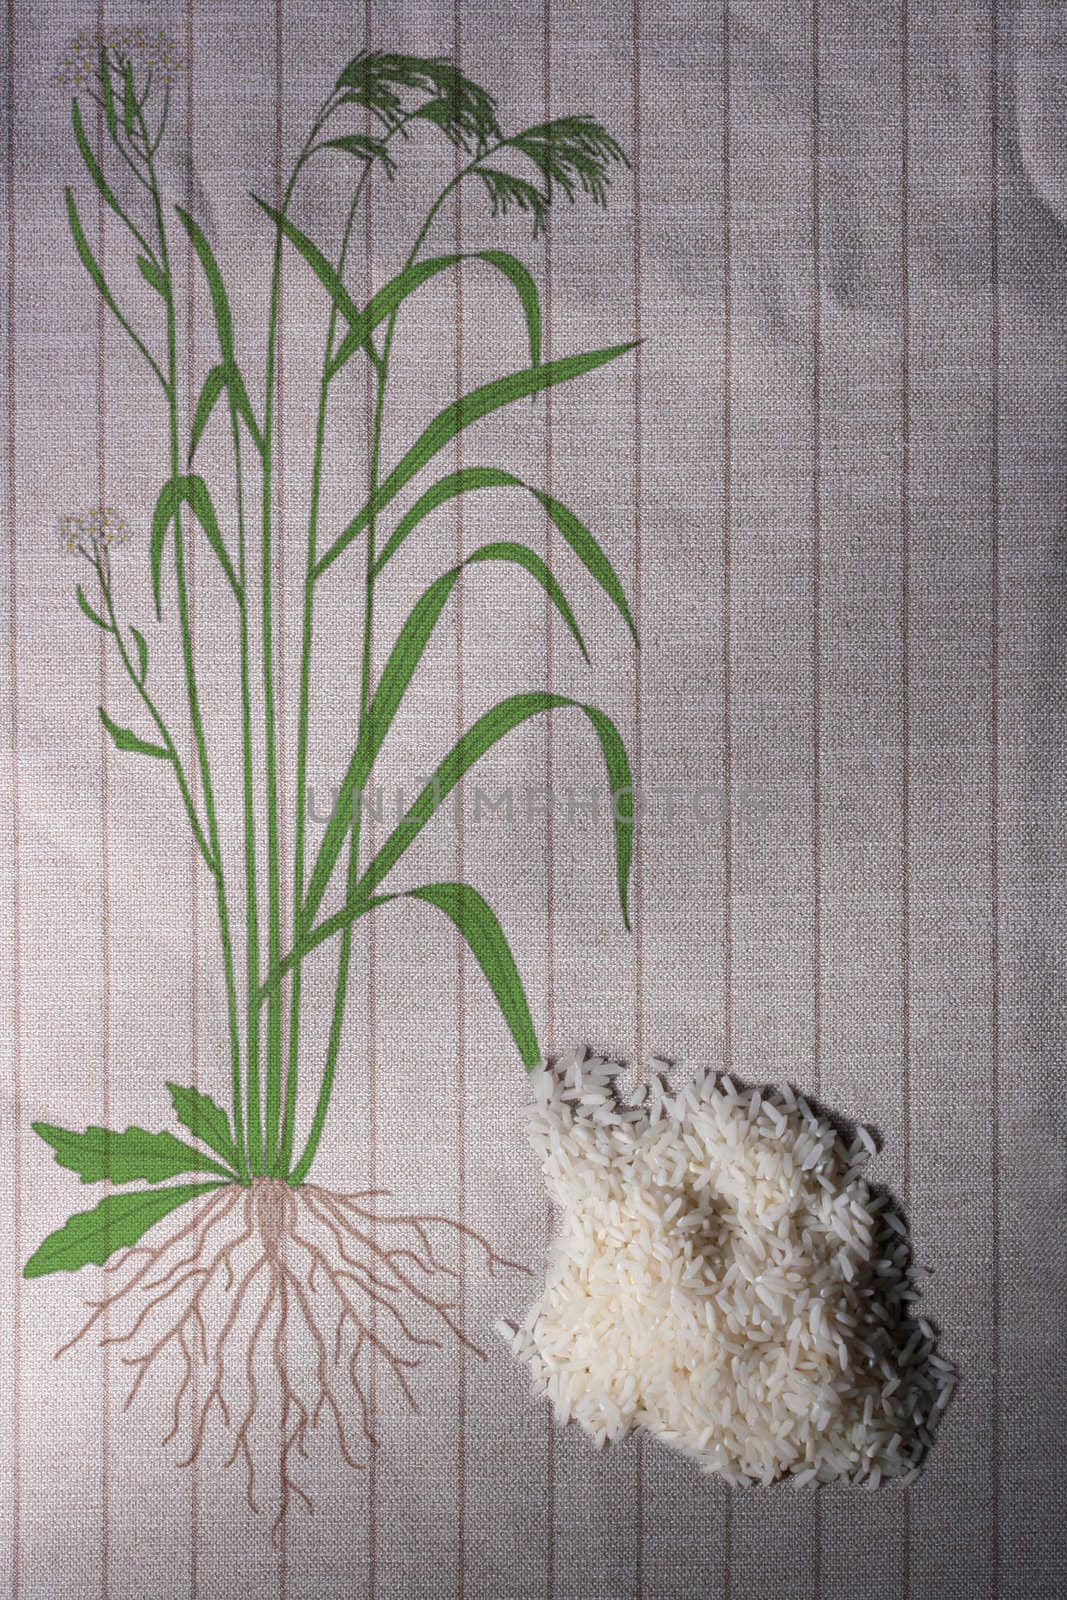 Rice grains against with the image of a plant fig. Roots, stalks, a flower and grains.